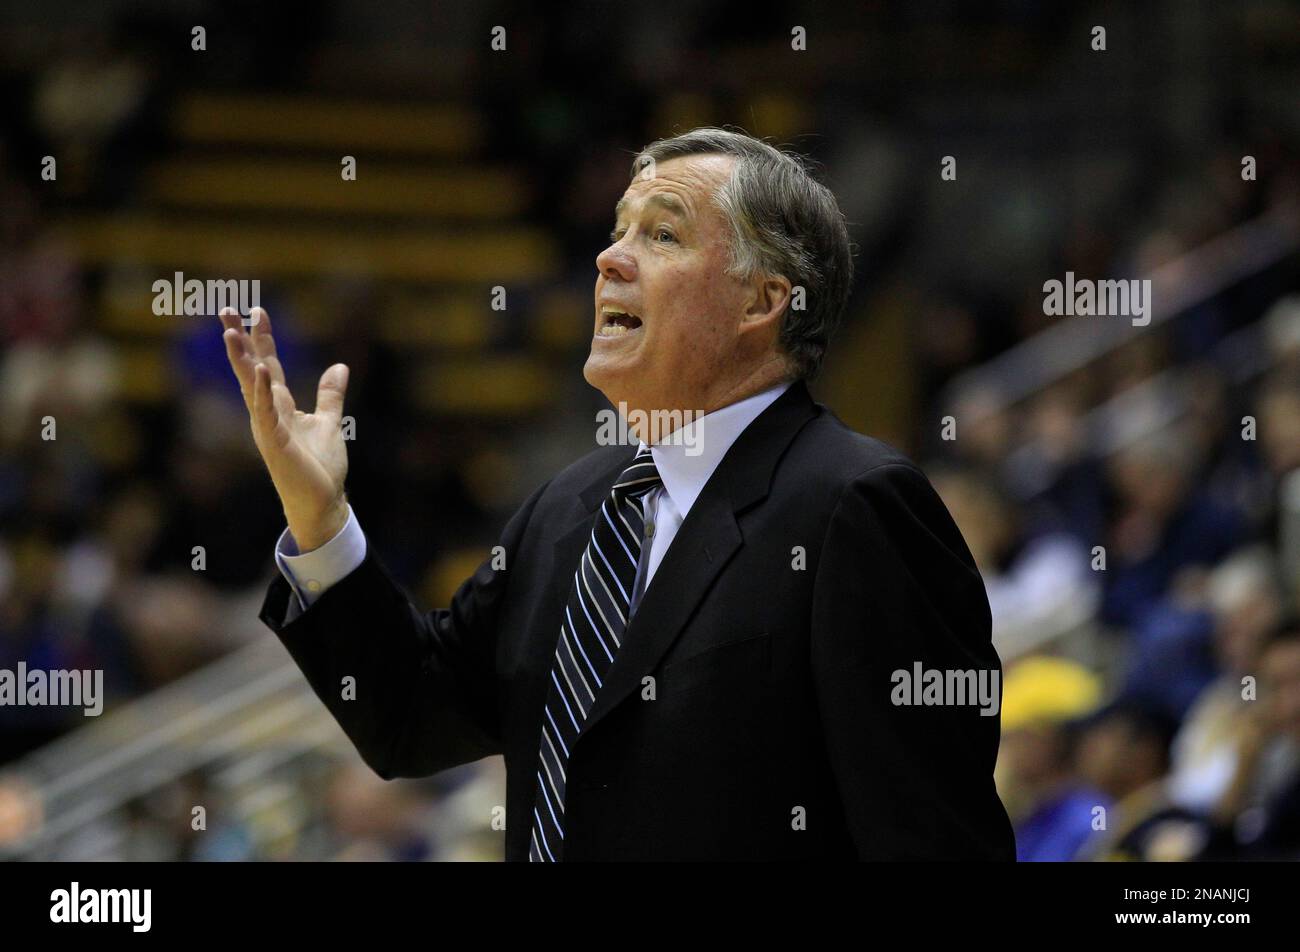 California head coach Mike Montgomery instructs his team against San Jose  State during the second half of an NCAA college basketball game in  Berkeley, Calif., Wednesday, Dec. 7, 2011.(AP Photo/Marcio Jose Sanchez